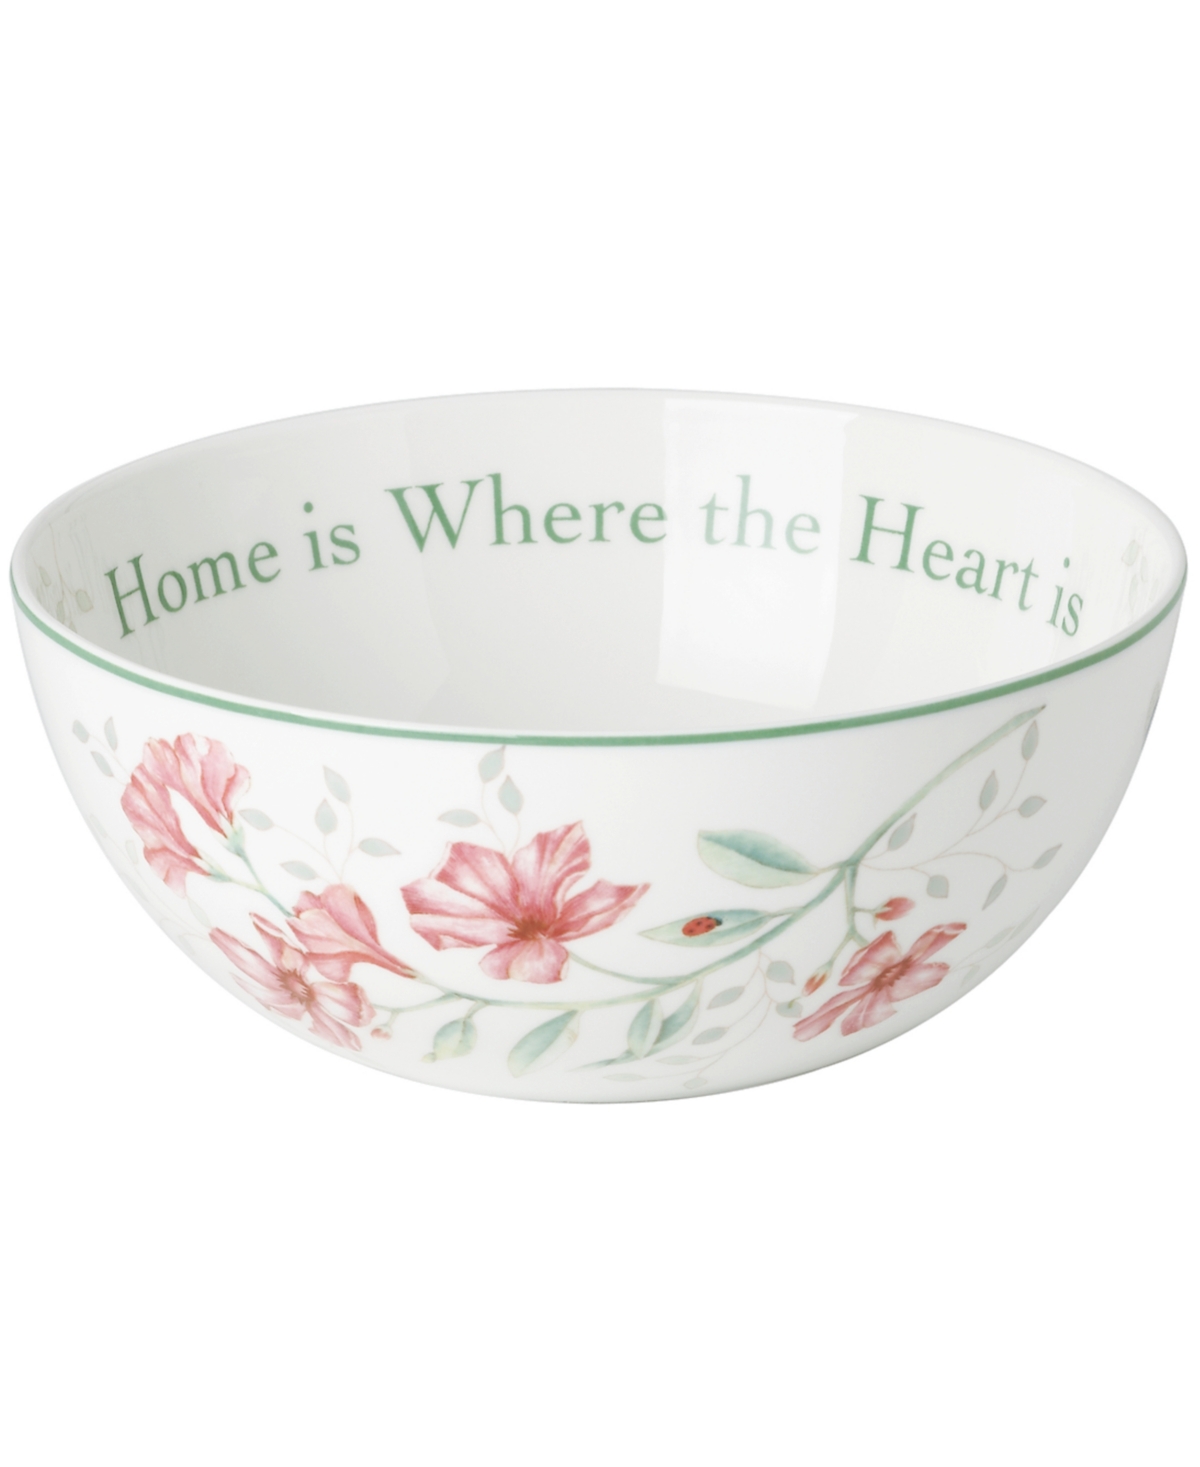 Butterfly Meadow Bowl Where the Heart Is